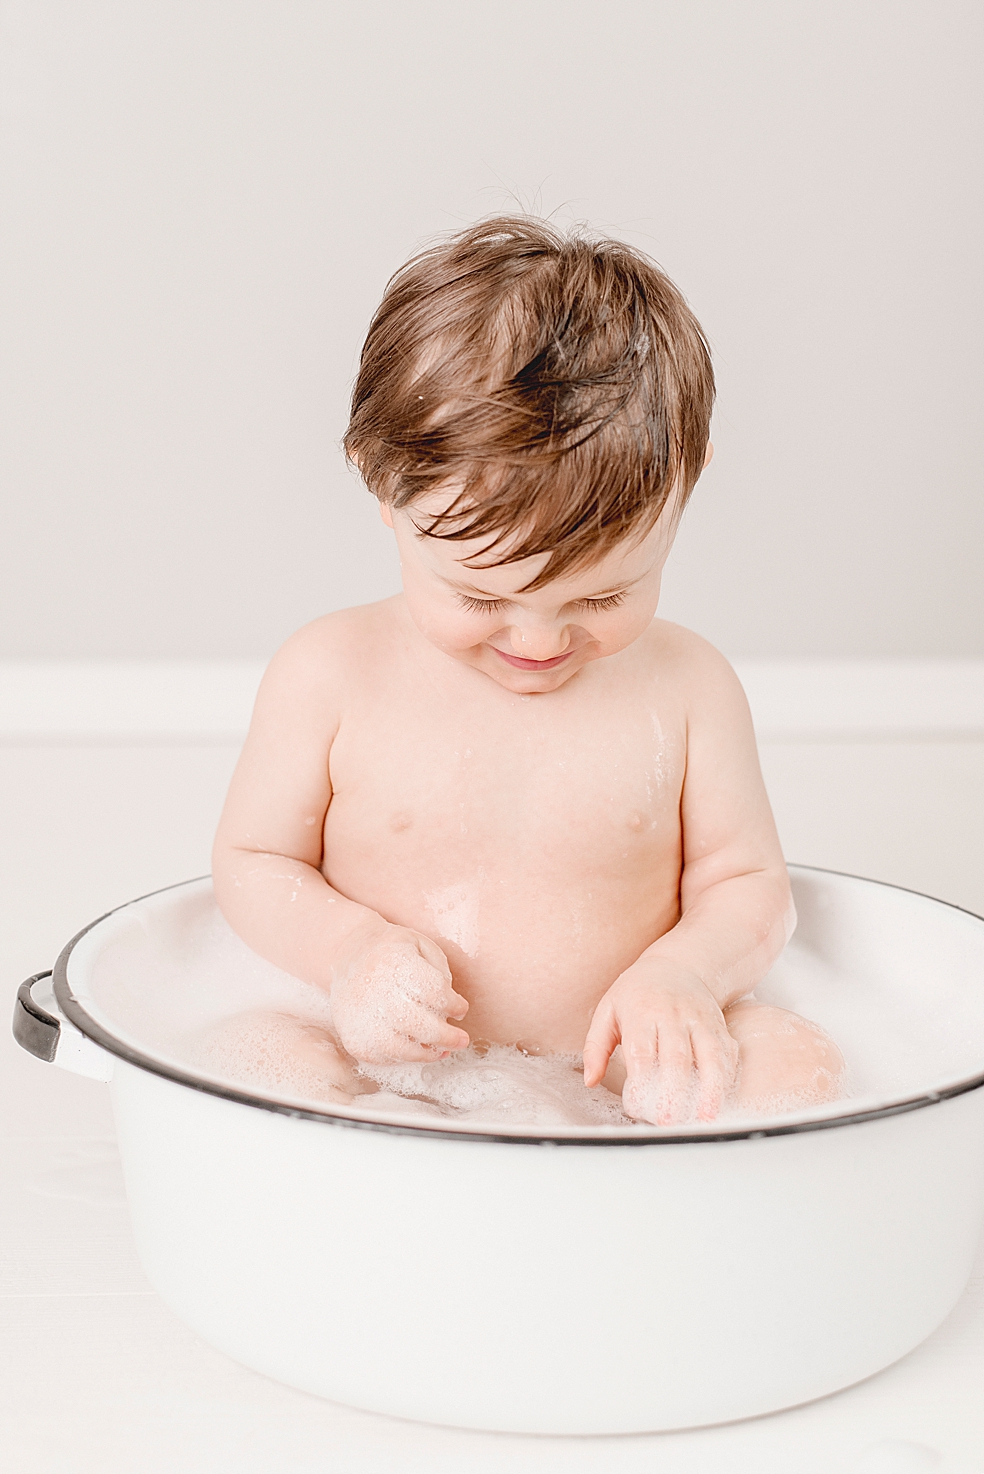 Toddler boy in bubble bath | Photo by Jessica Lee Photography